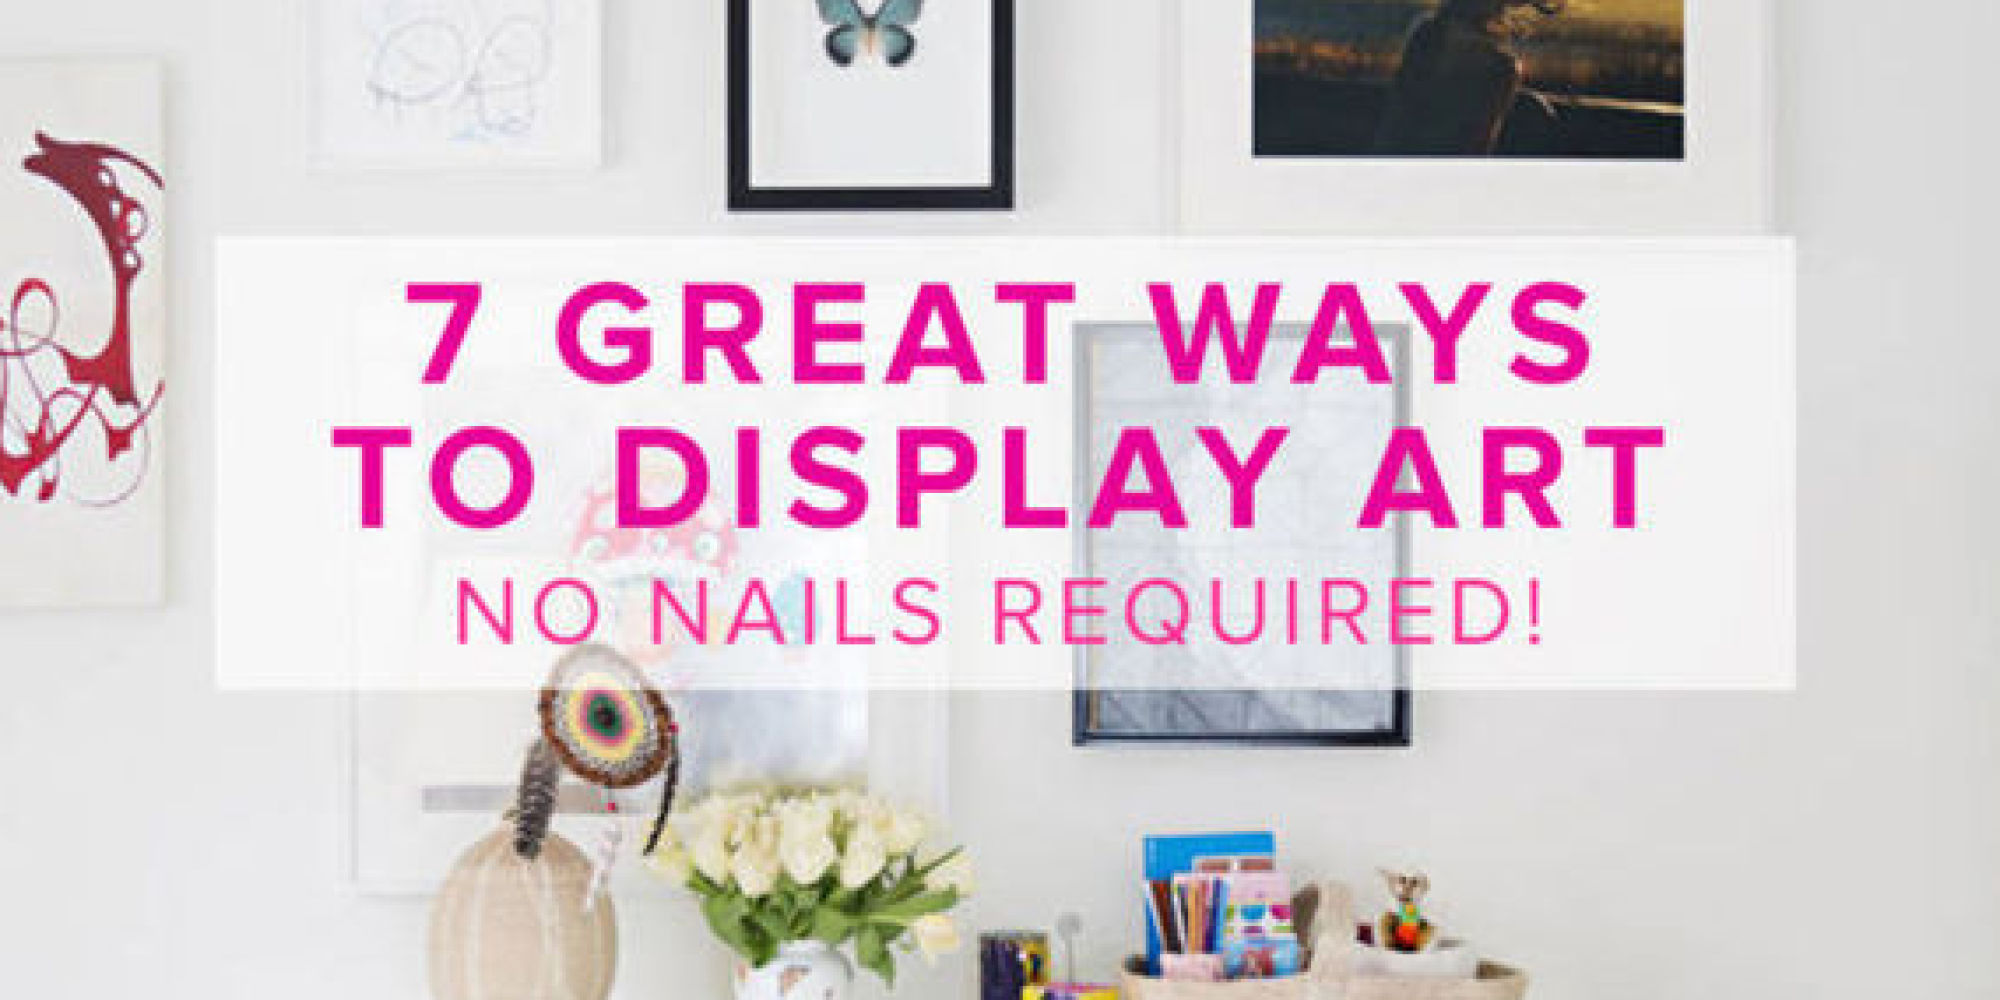 nails hang without display ways required huffingtonpost huffpost